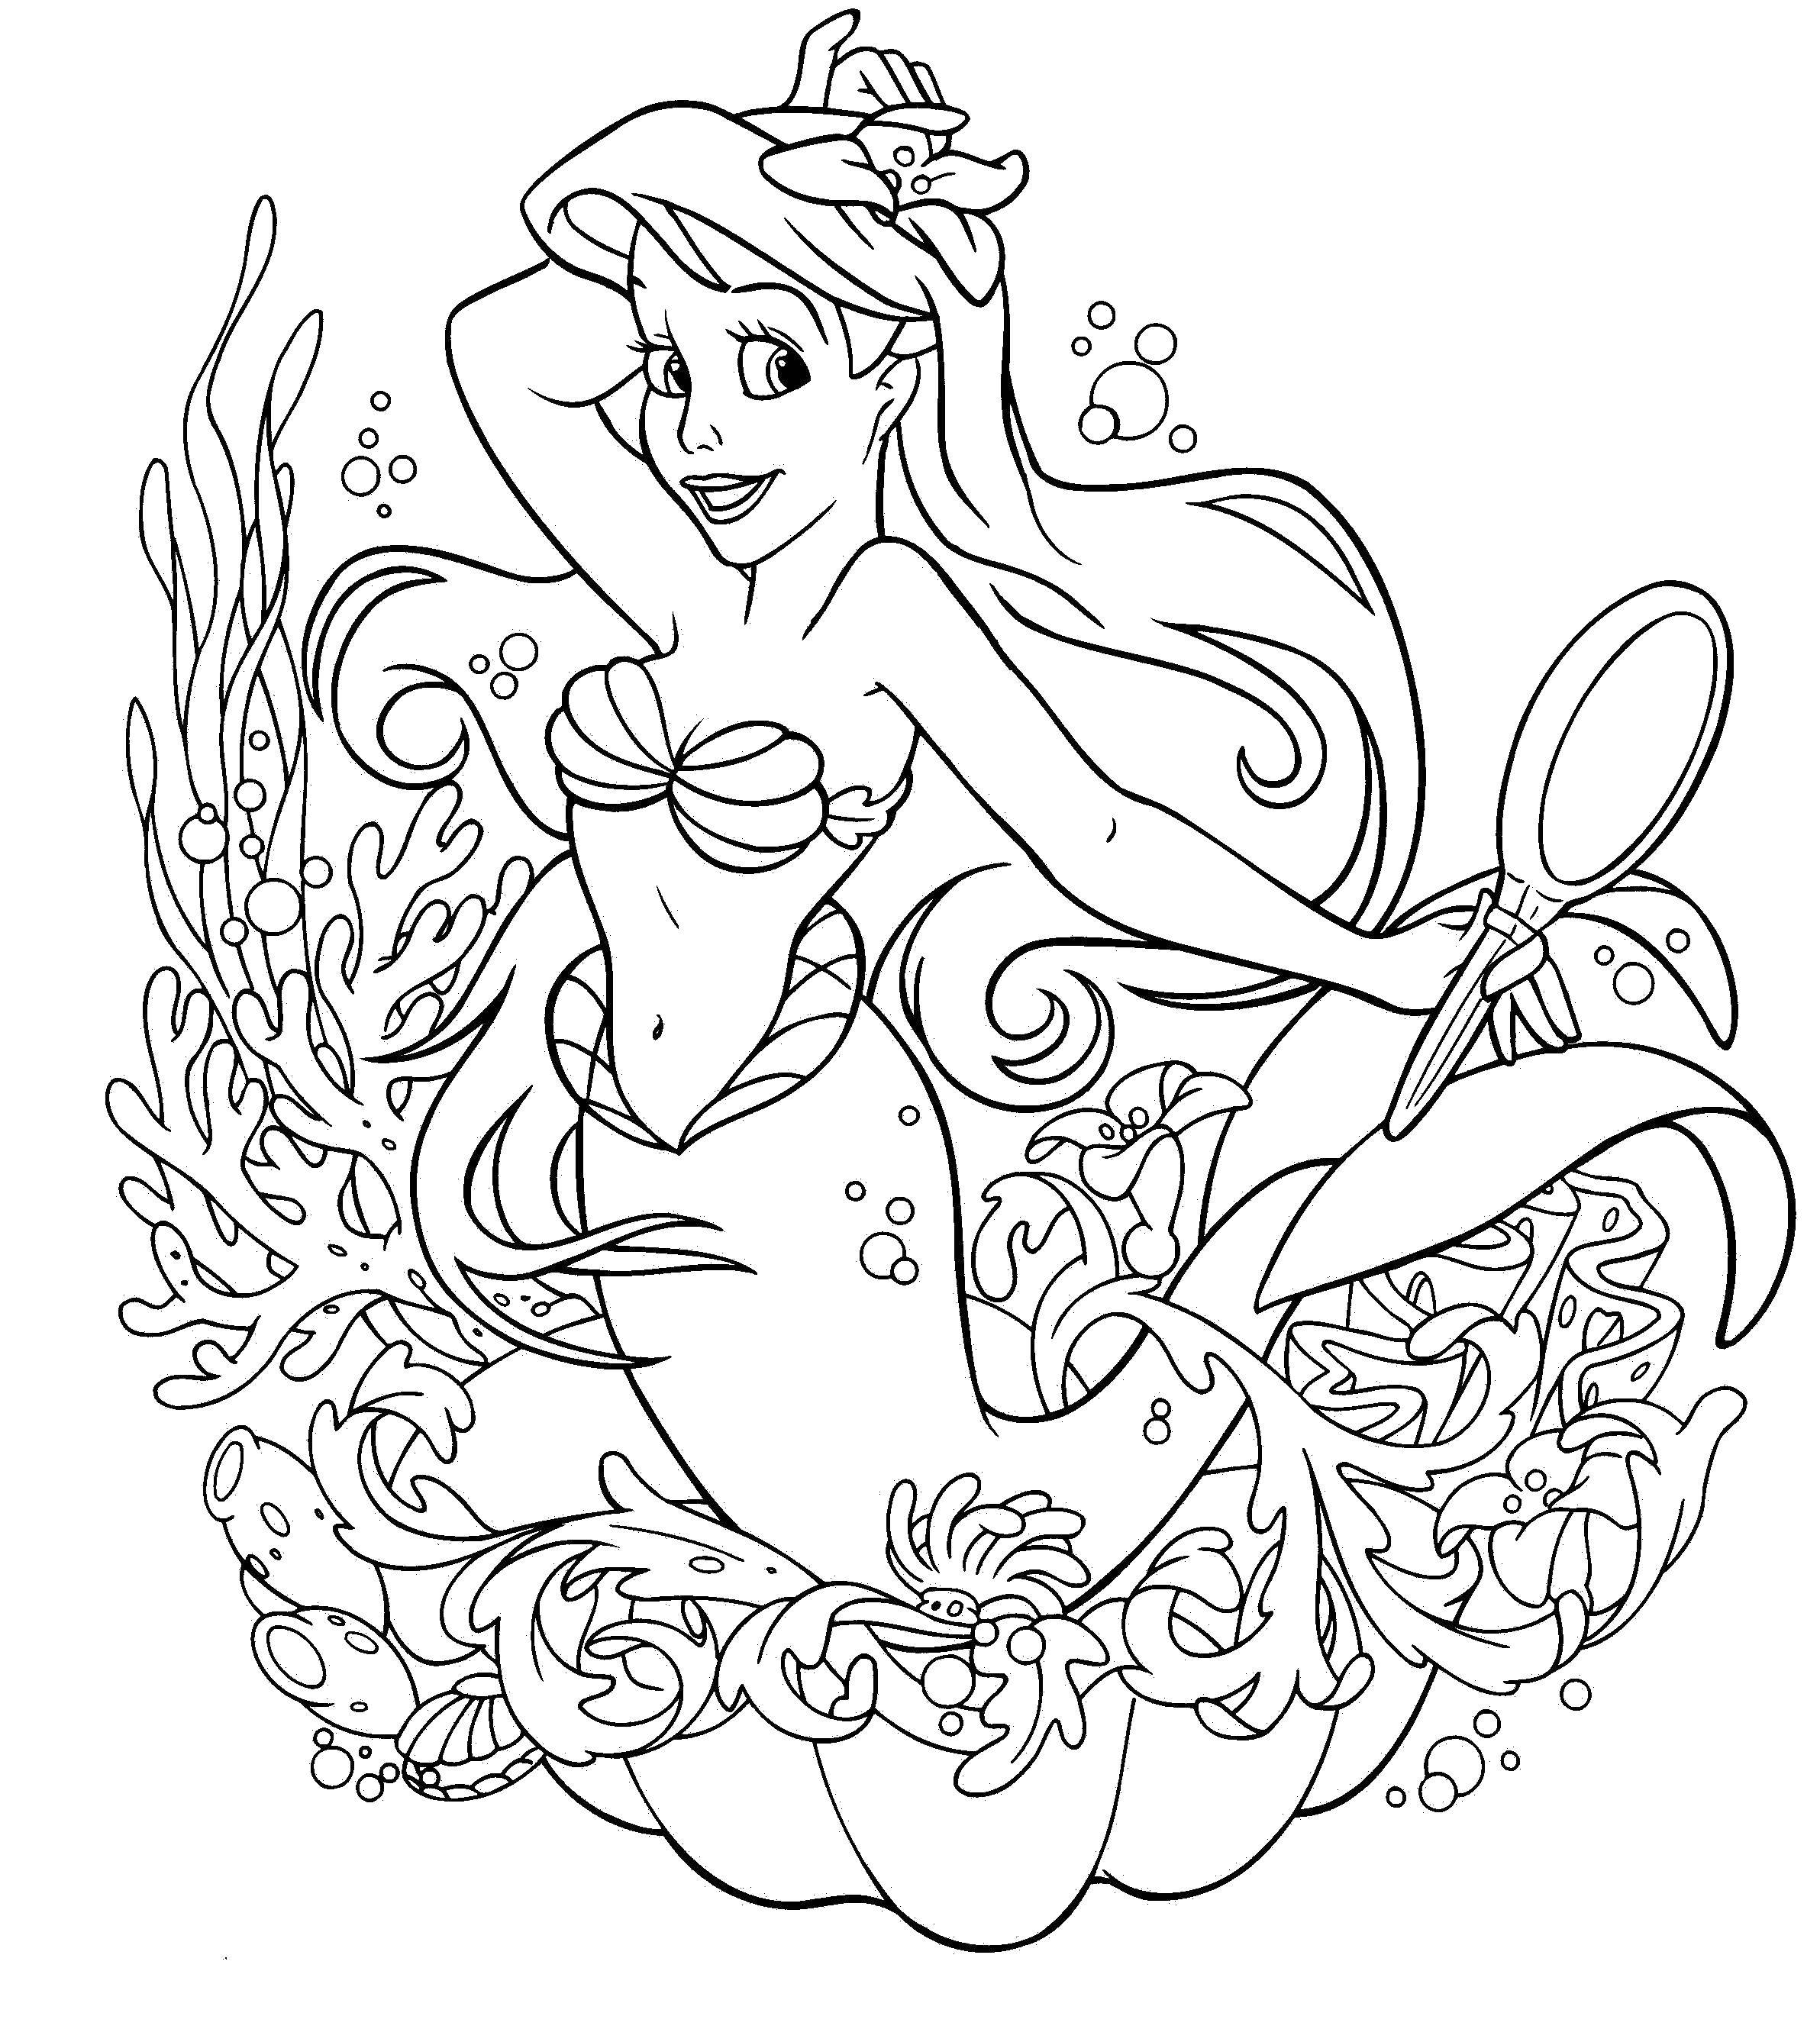 Coloring Ariel with mirror. Category The little mermaid. Tags:  The little mermaid, Disney, Ariel, mirror.